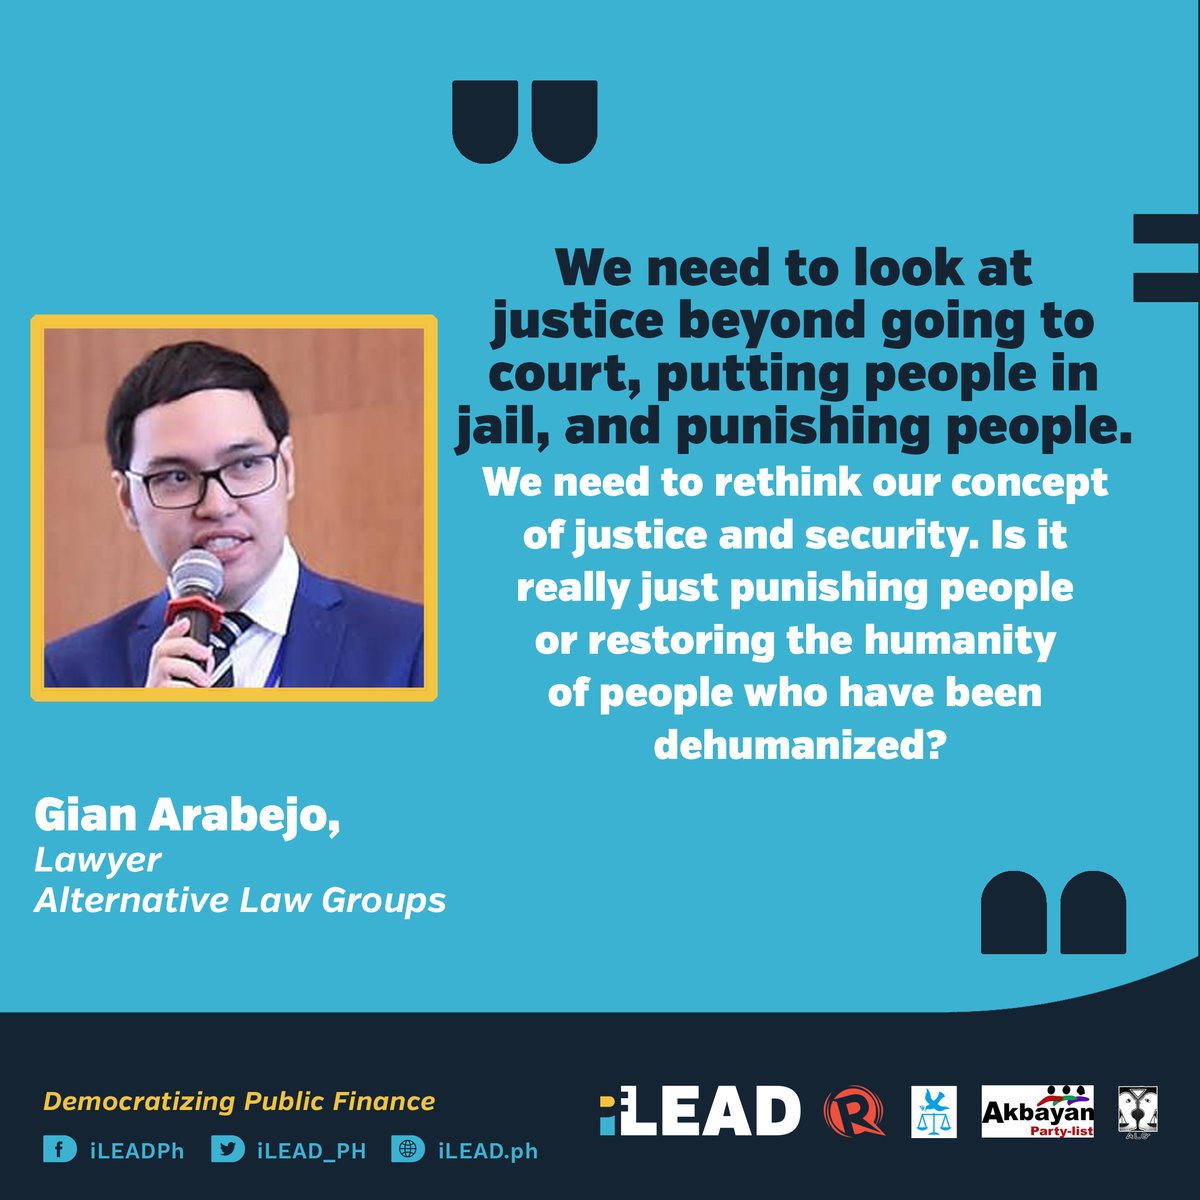 Gian Arabejo, Alternative Law Groups lawyer, says large budgets will not legitimize unconstitutional policies. He says shifting from punitive to restorative justice needs to be considered. He shares that courts are clogged and more people are in jail since the drug war started.